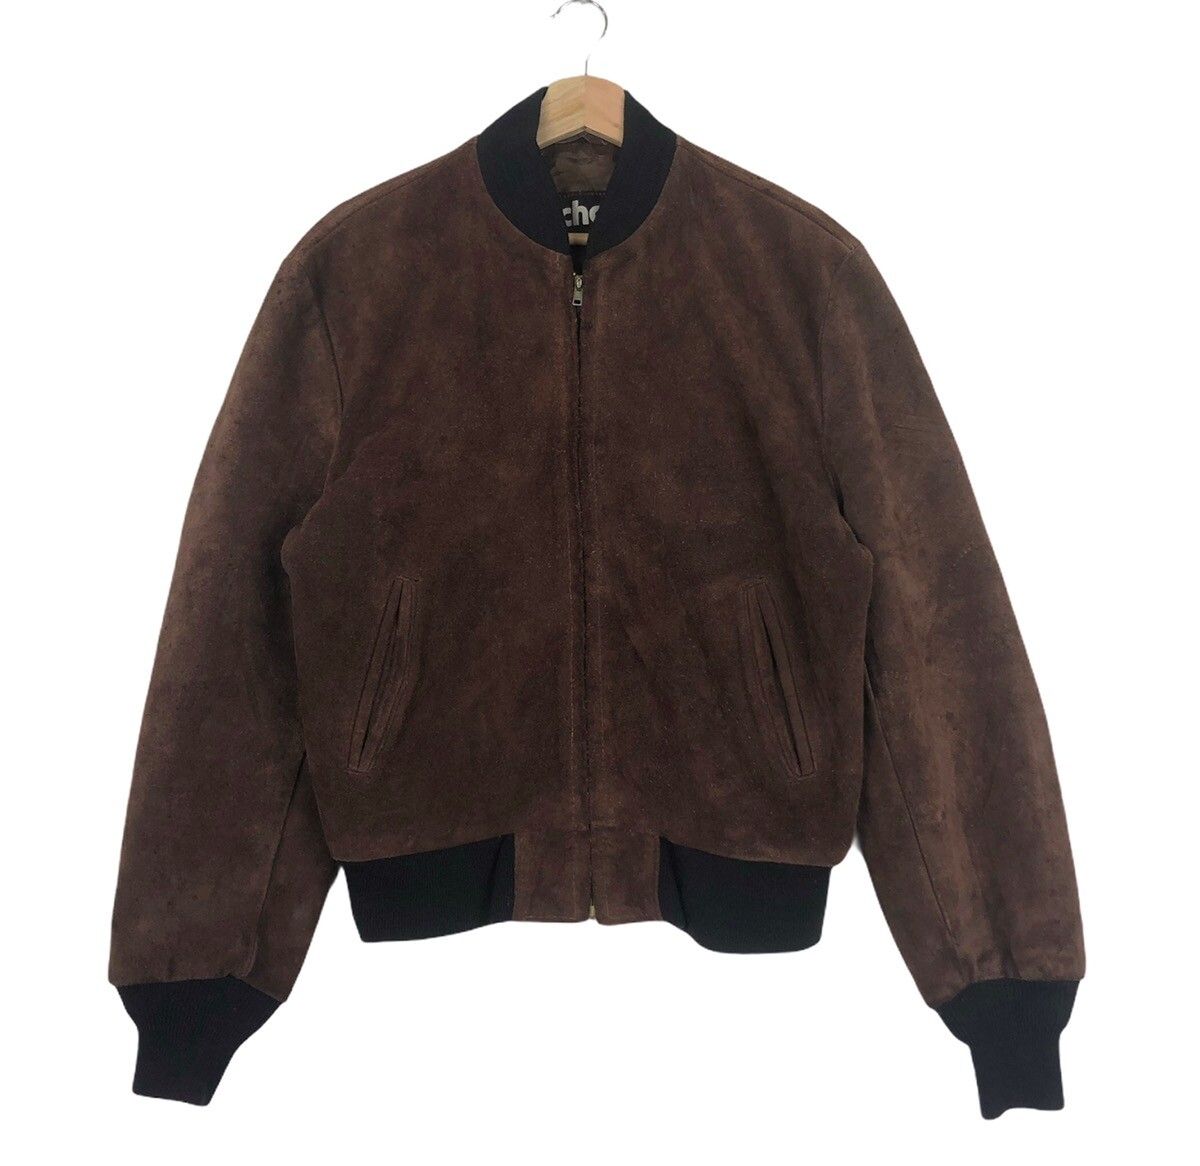 🔥SCHOTT NYC Pulp Fiction Suede Leather Jacket - 1